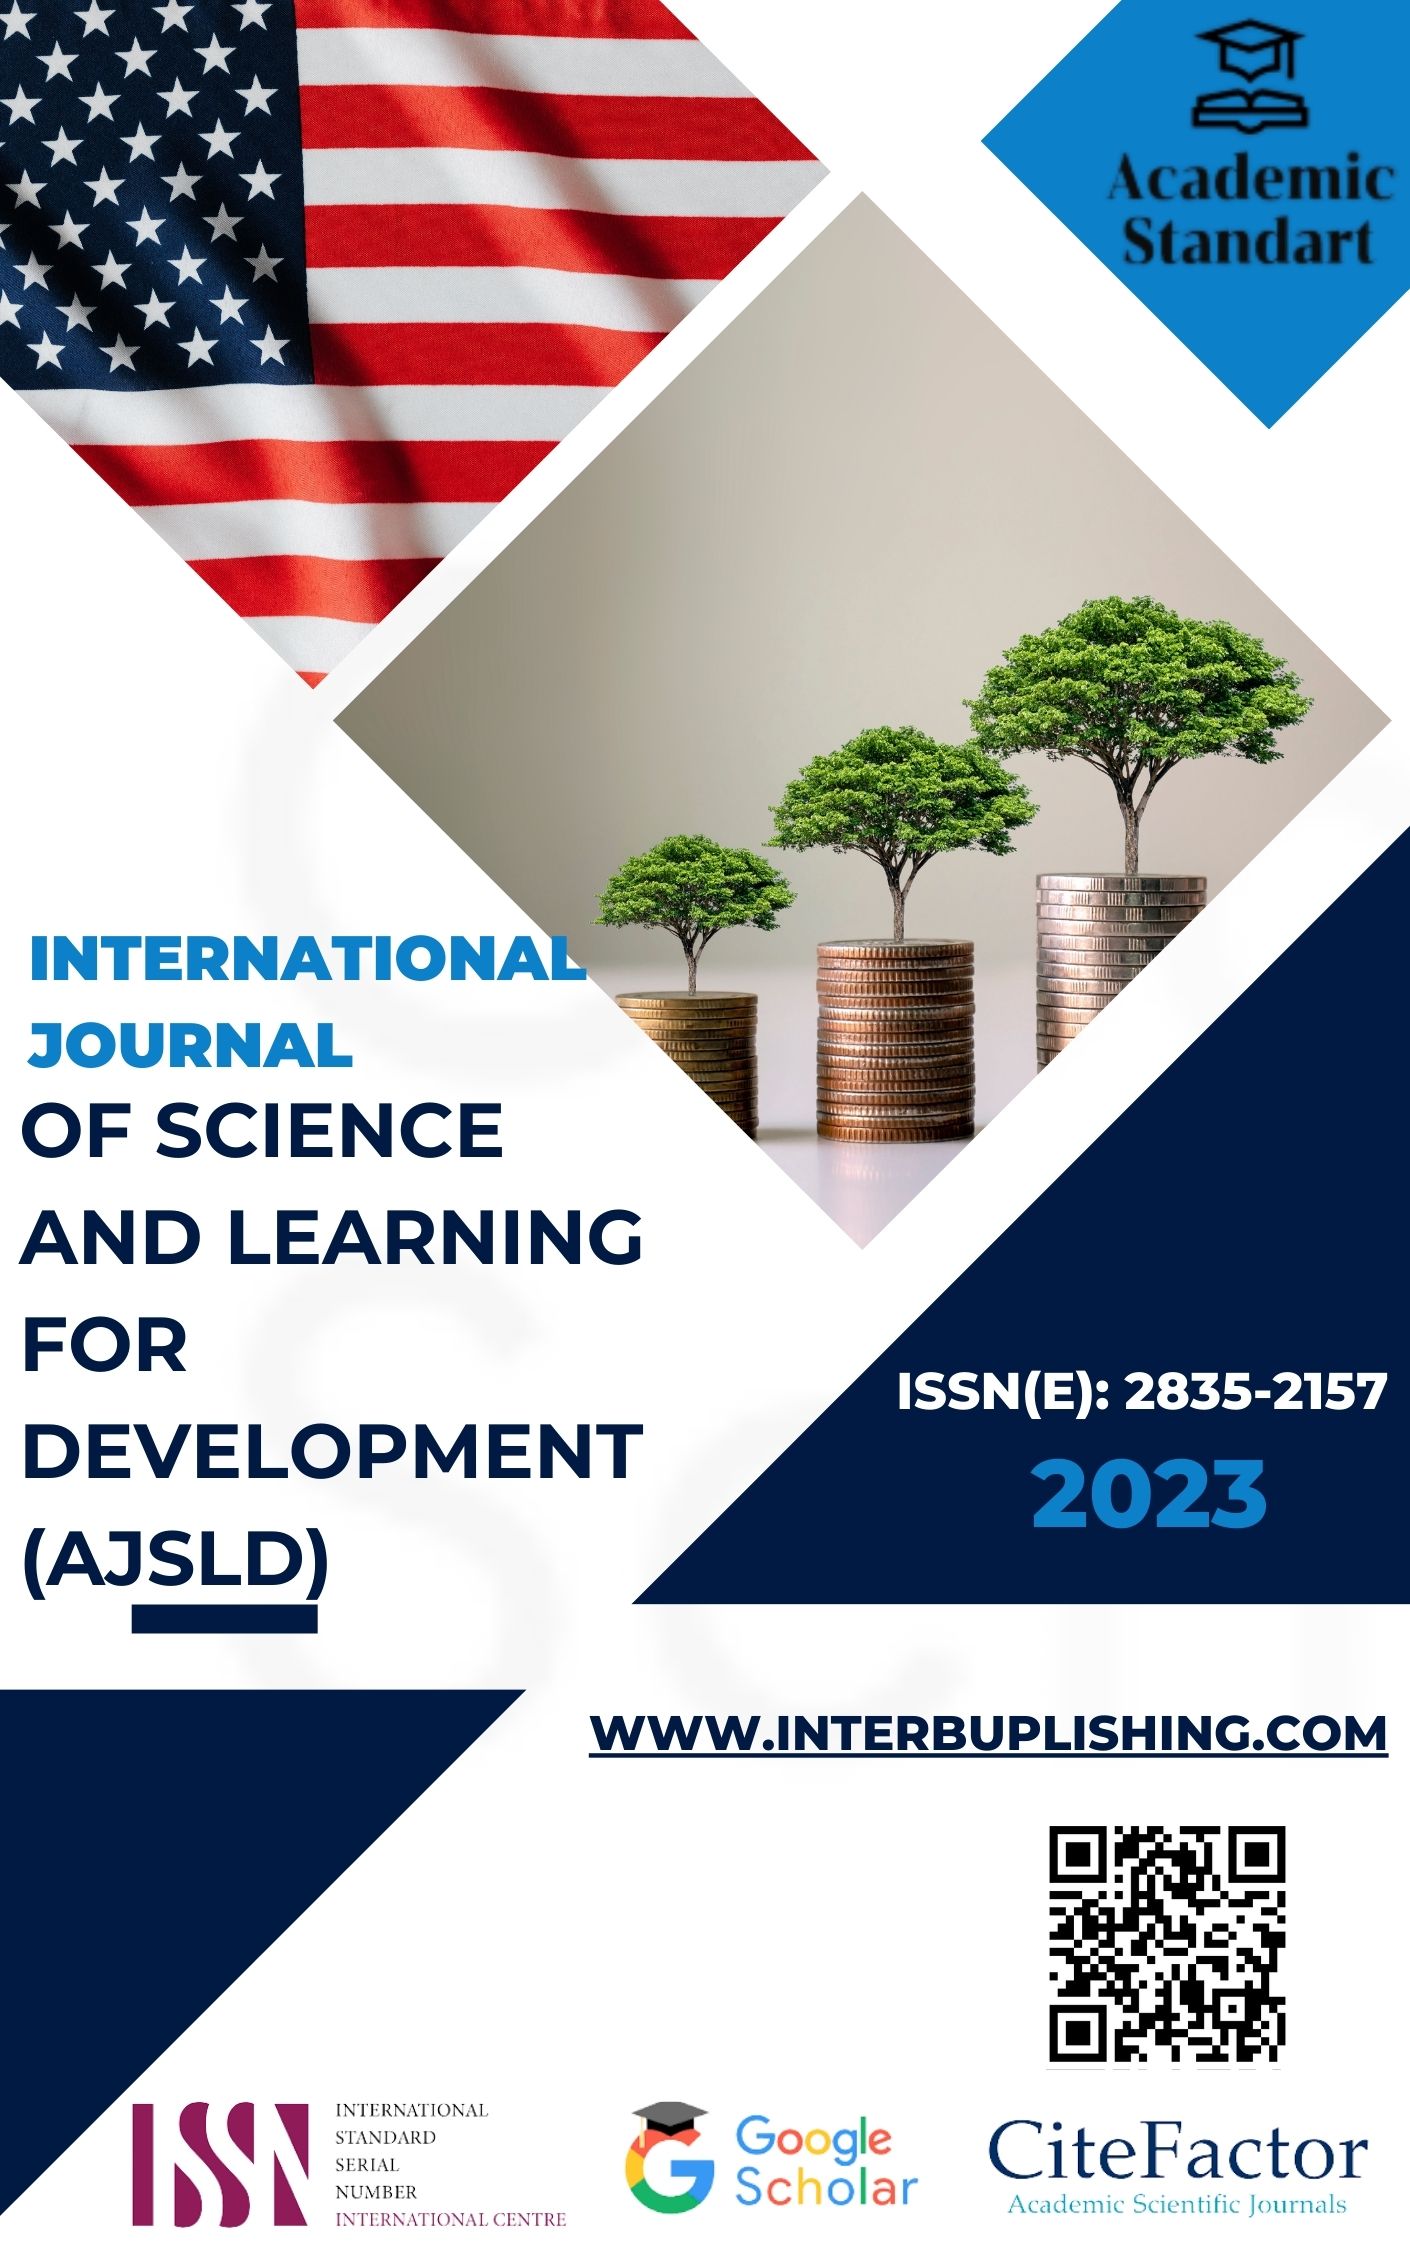 American Journal of Science and Learning for Development (AJSLD)